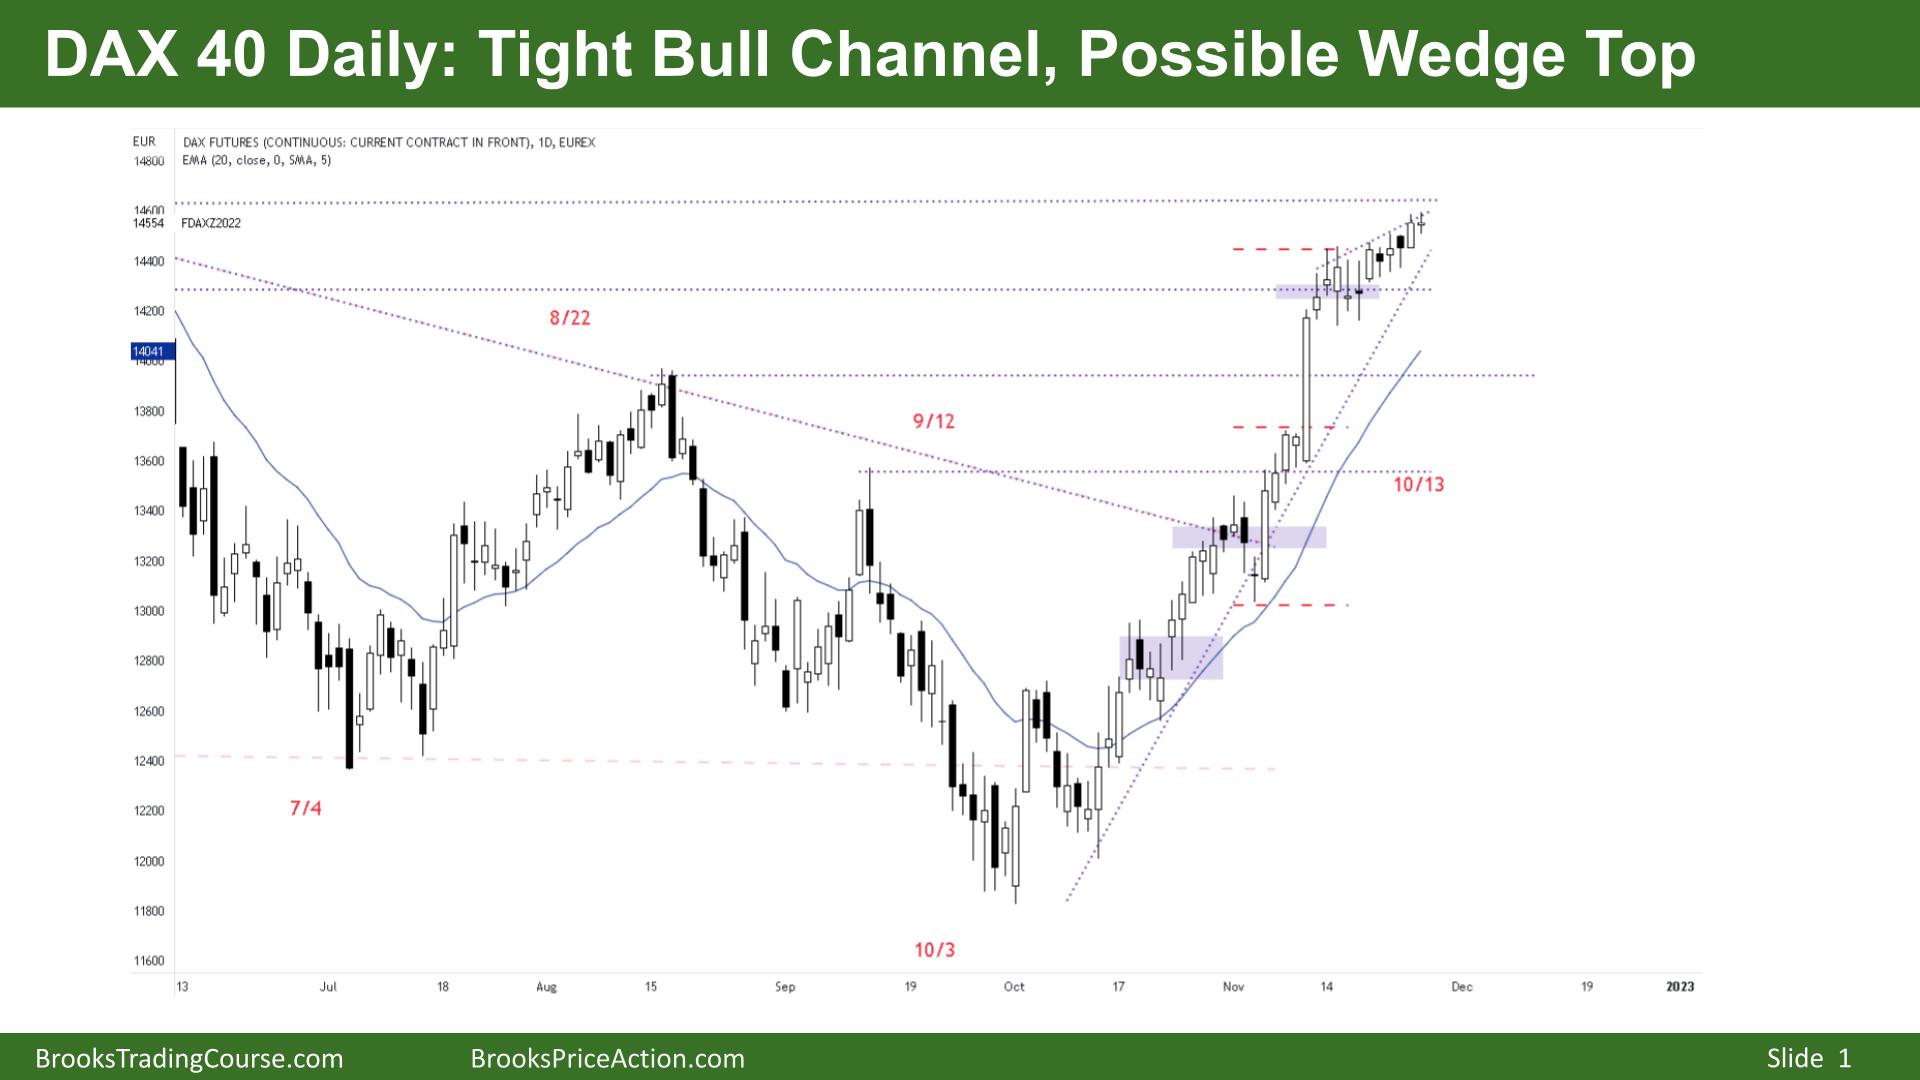 DAX 40 Tight Bull Channel, Possible Wedge Top